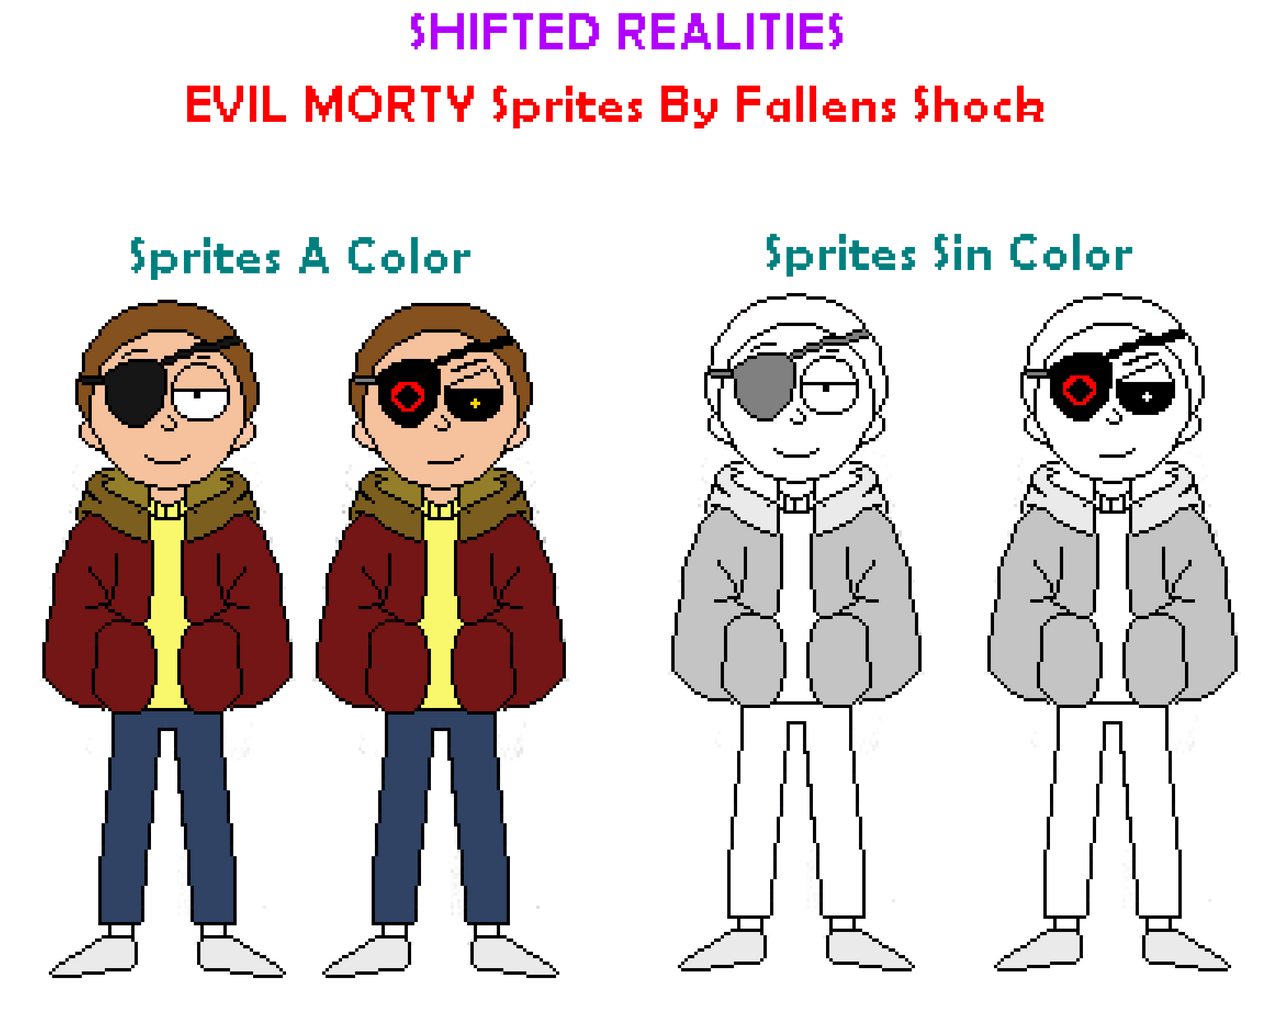 Evil Morty - Shifted Realities Minecraft Skin